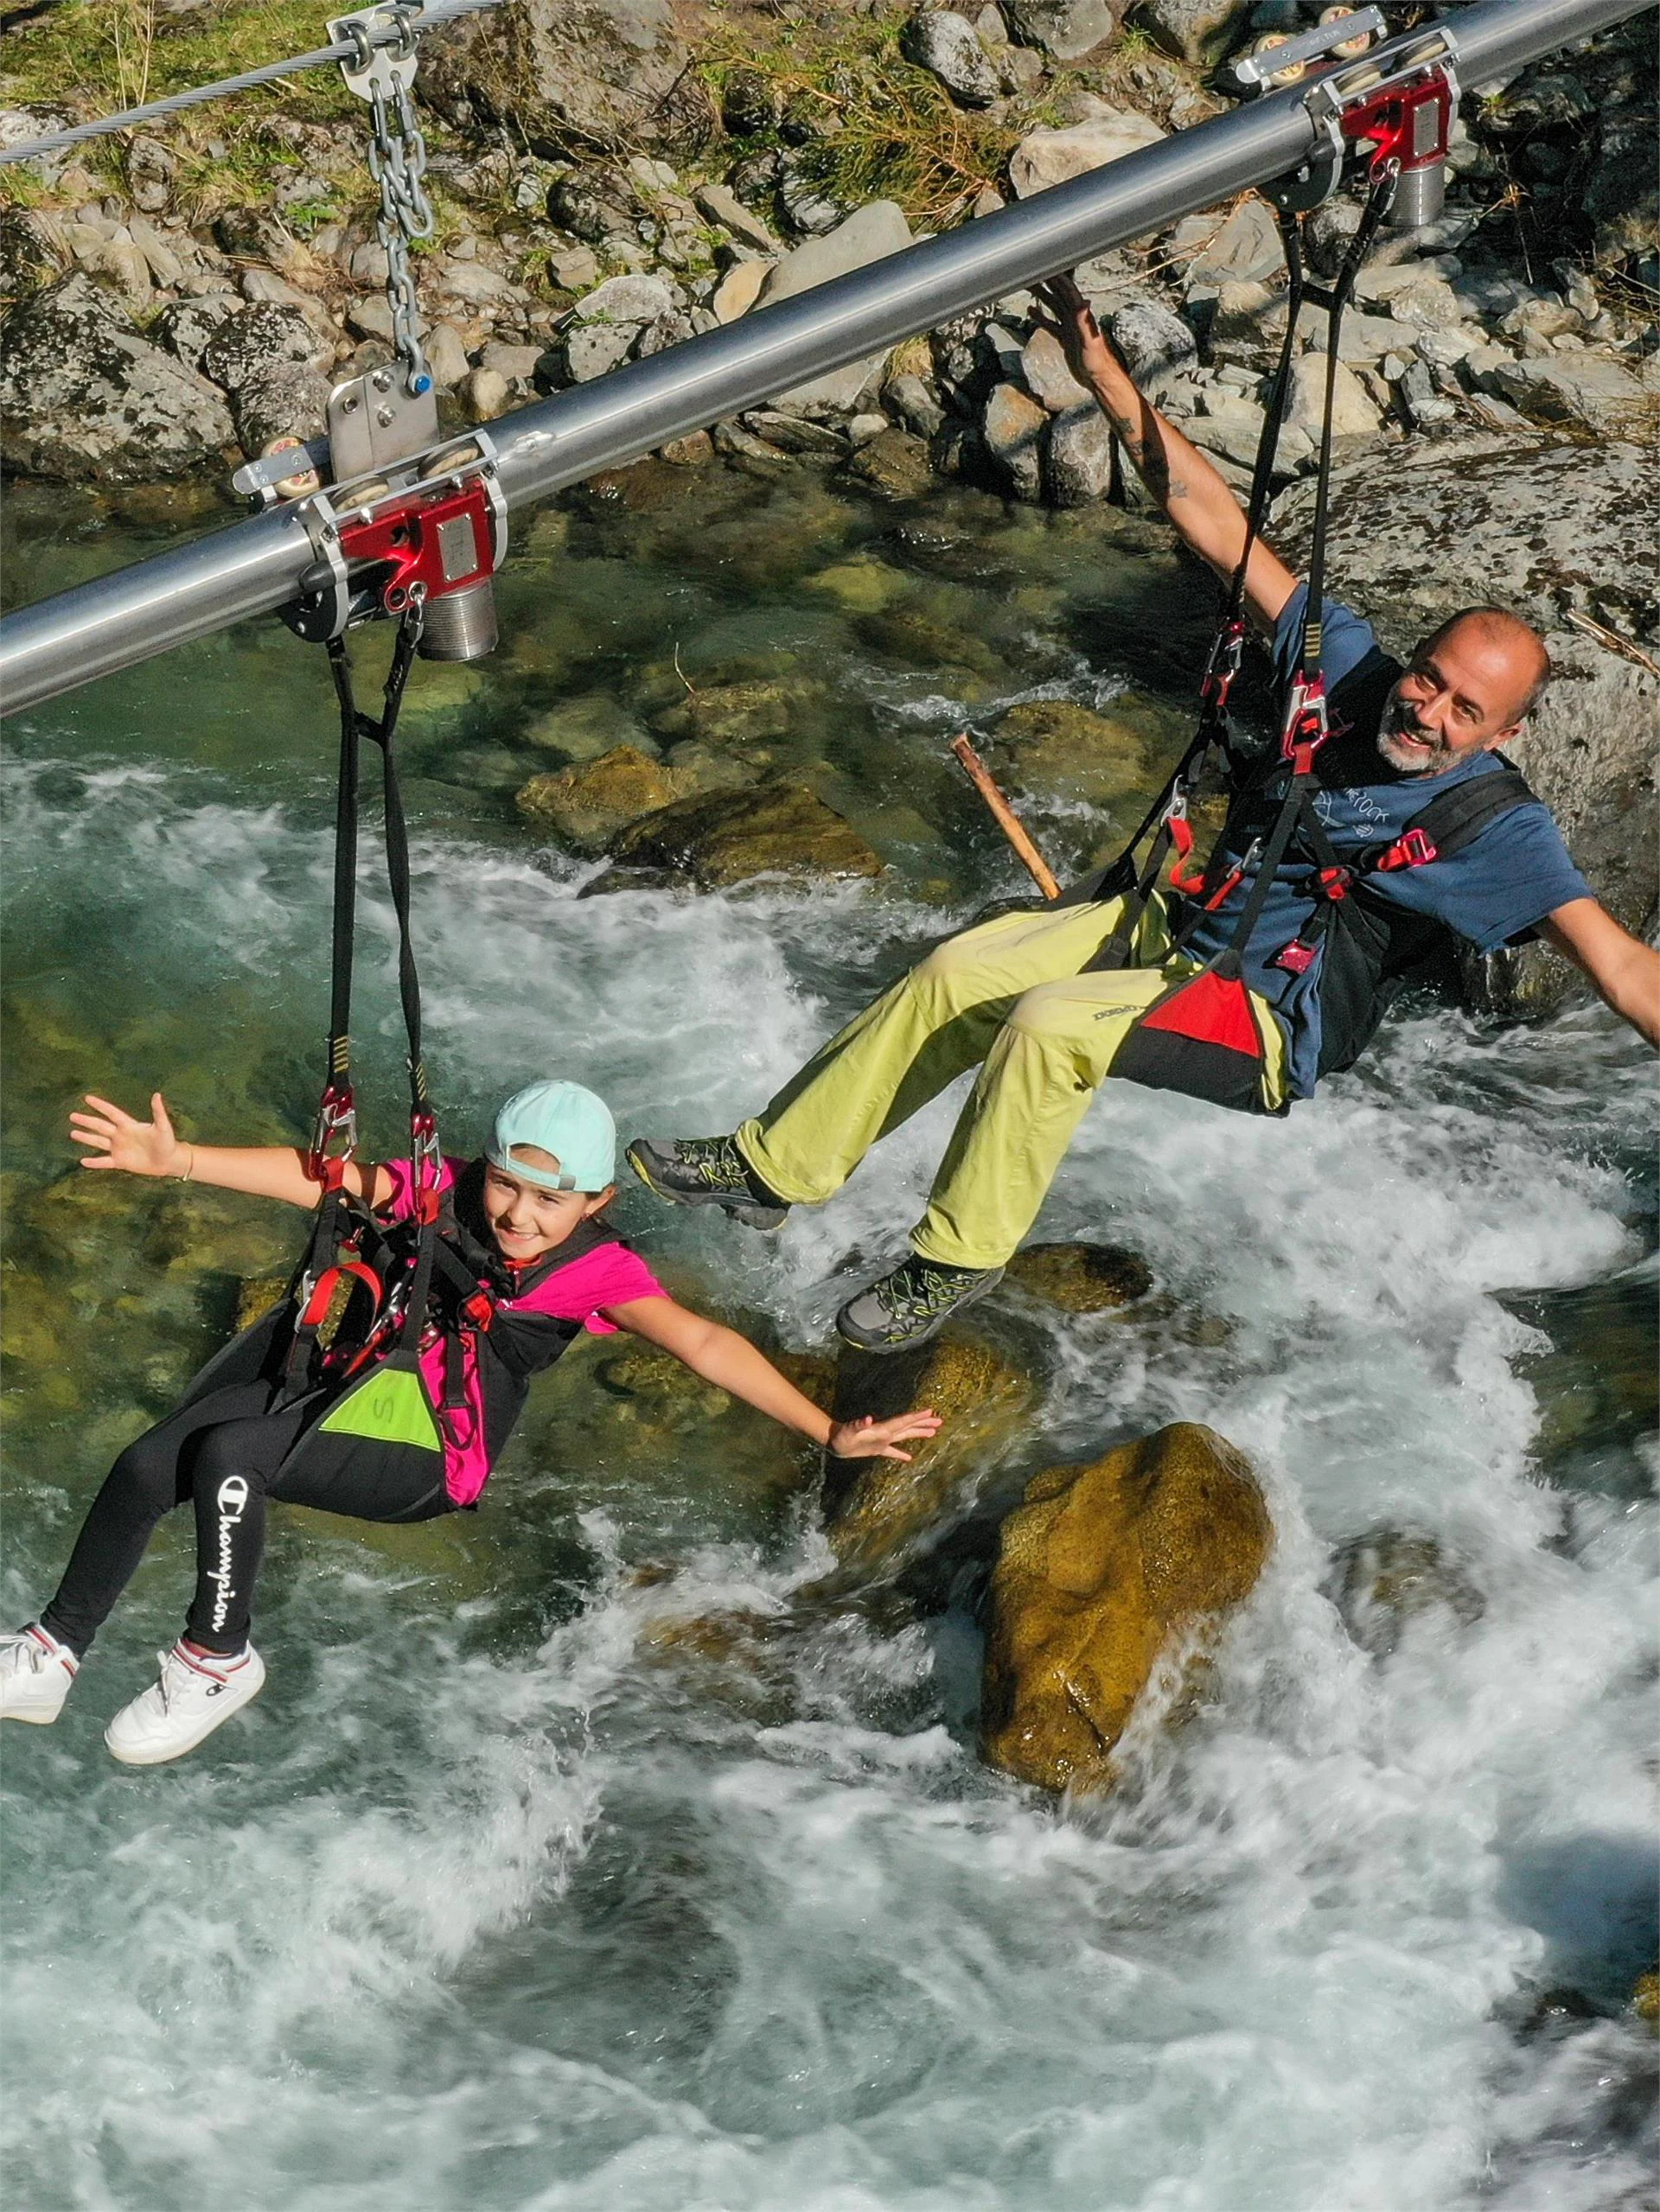 Fly-Line Cascate di Riva Campo Tures 3 suedtirol.info